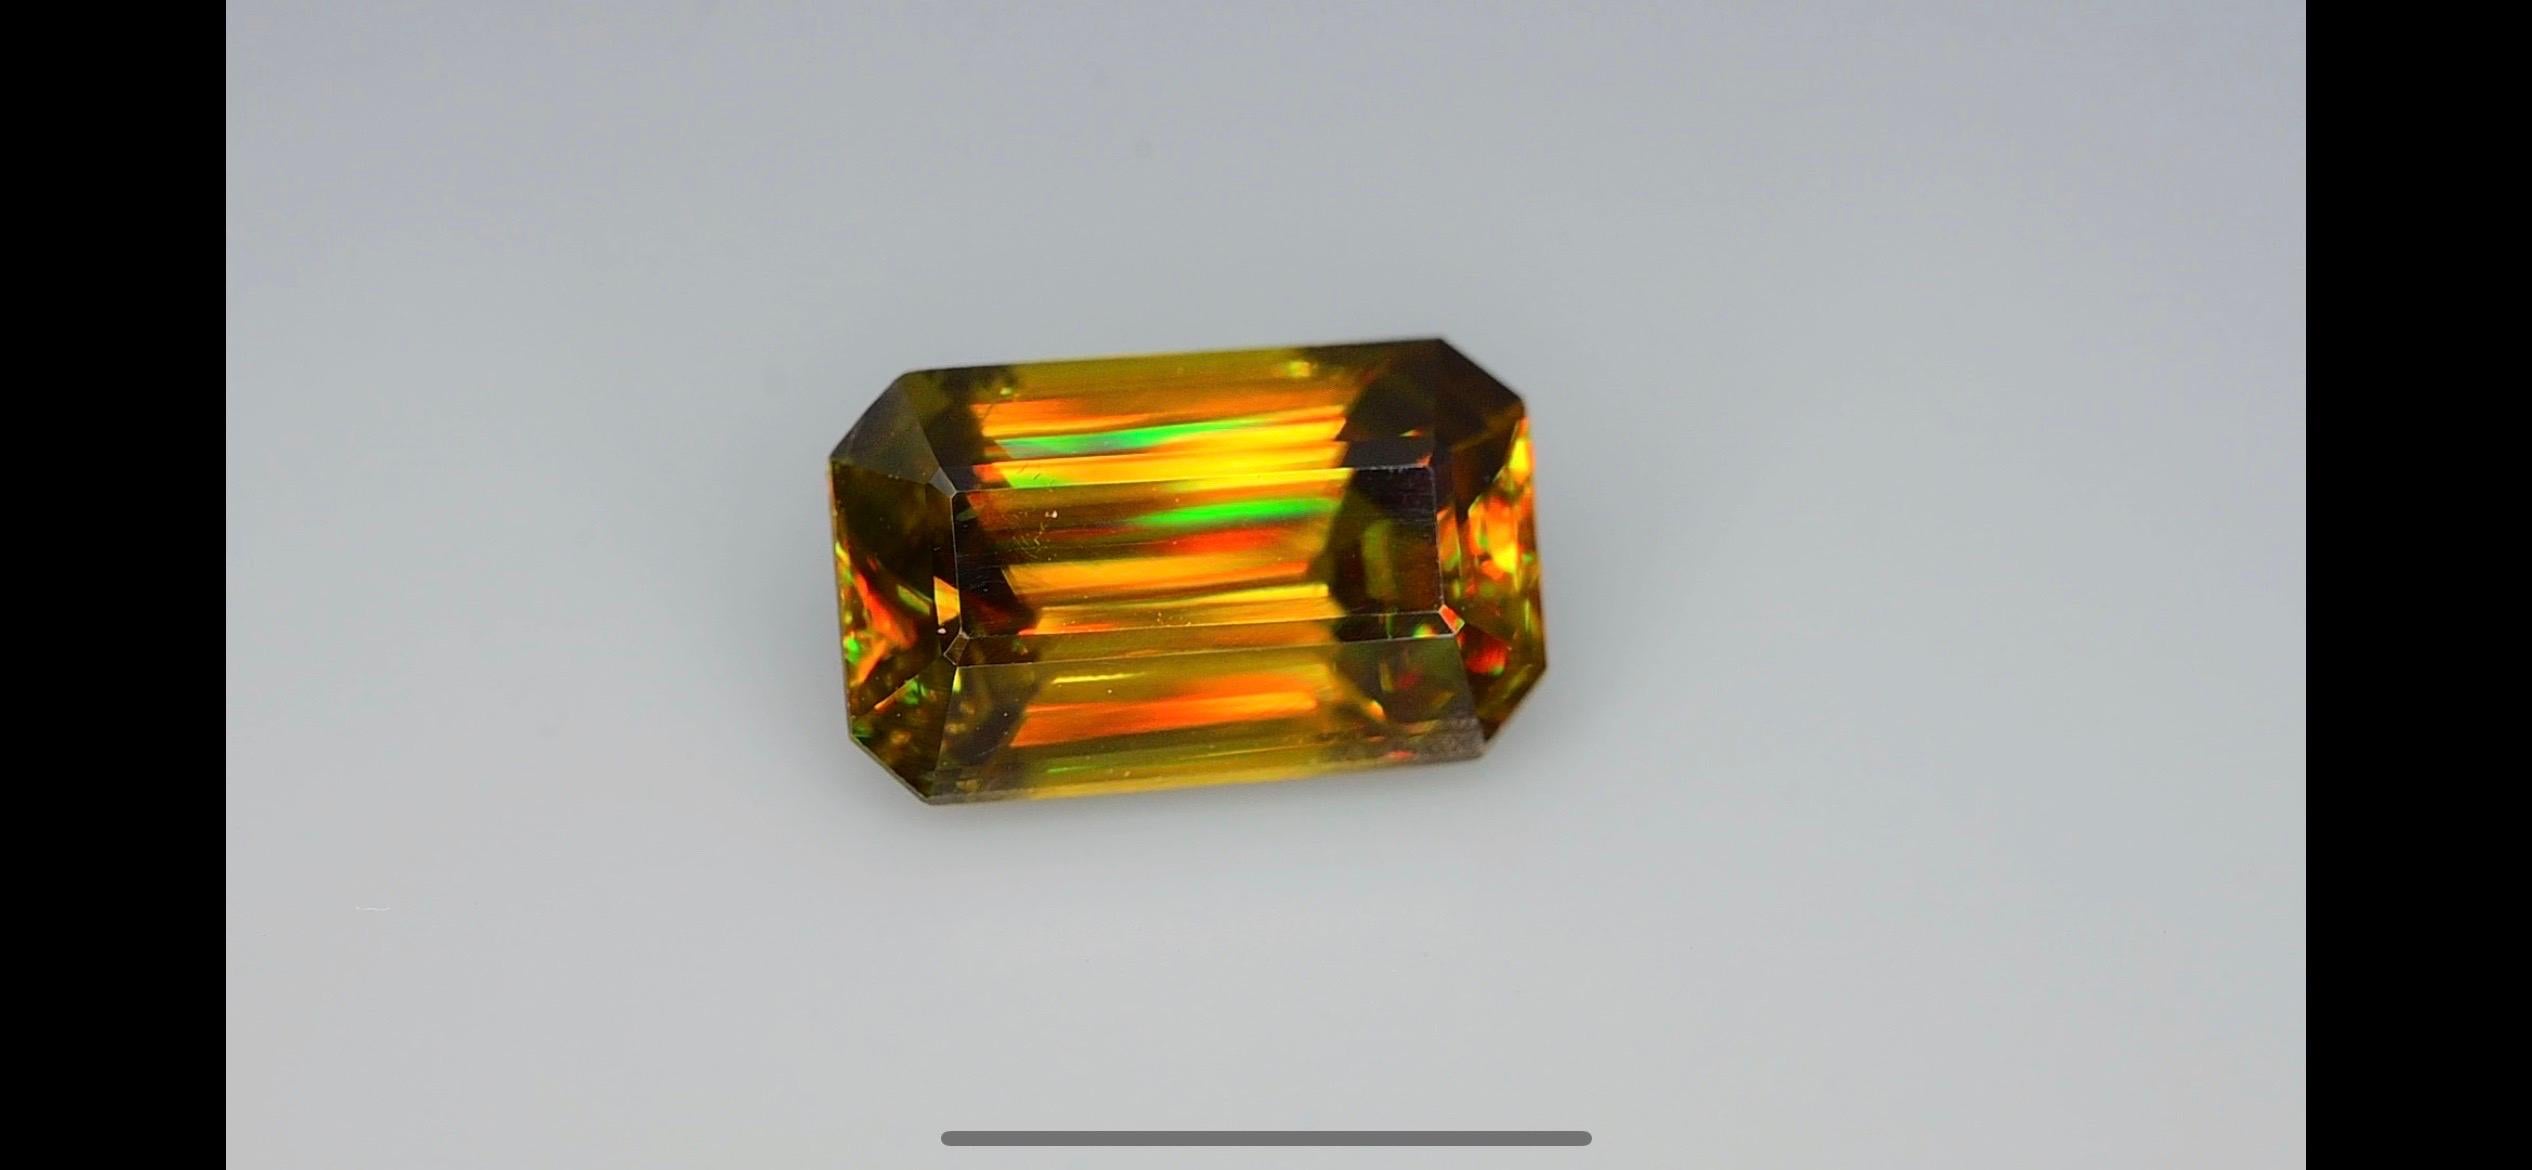 Introducing a stunning Sphene Titanite: 4.55 carat beauty. Its fiery brilliance is a sight to behold. Adorn yourself with this exquisite gem, a true testament to nature’s artistry. Available now for those who appreciate the